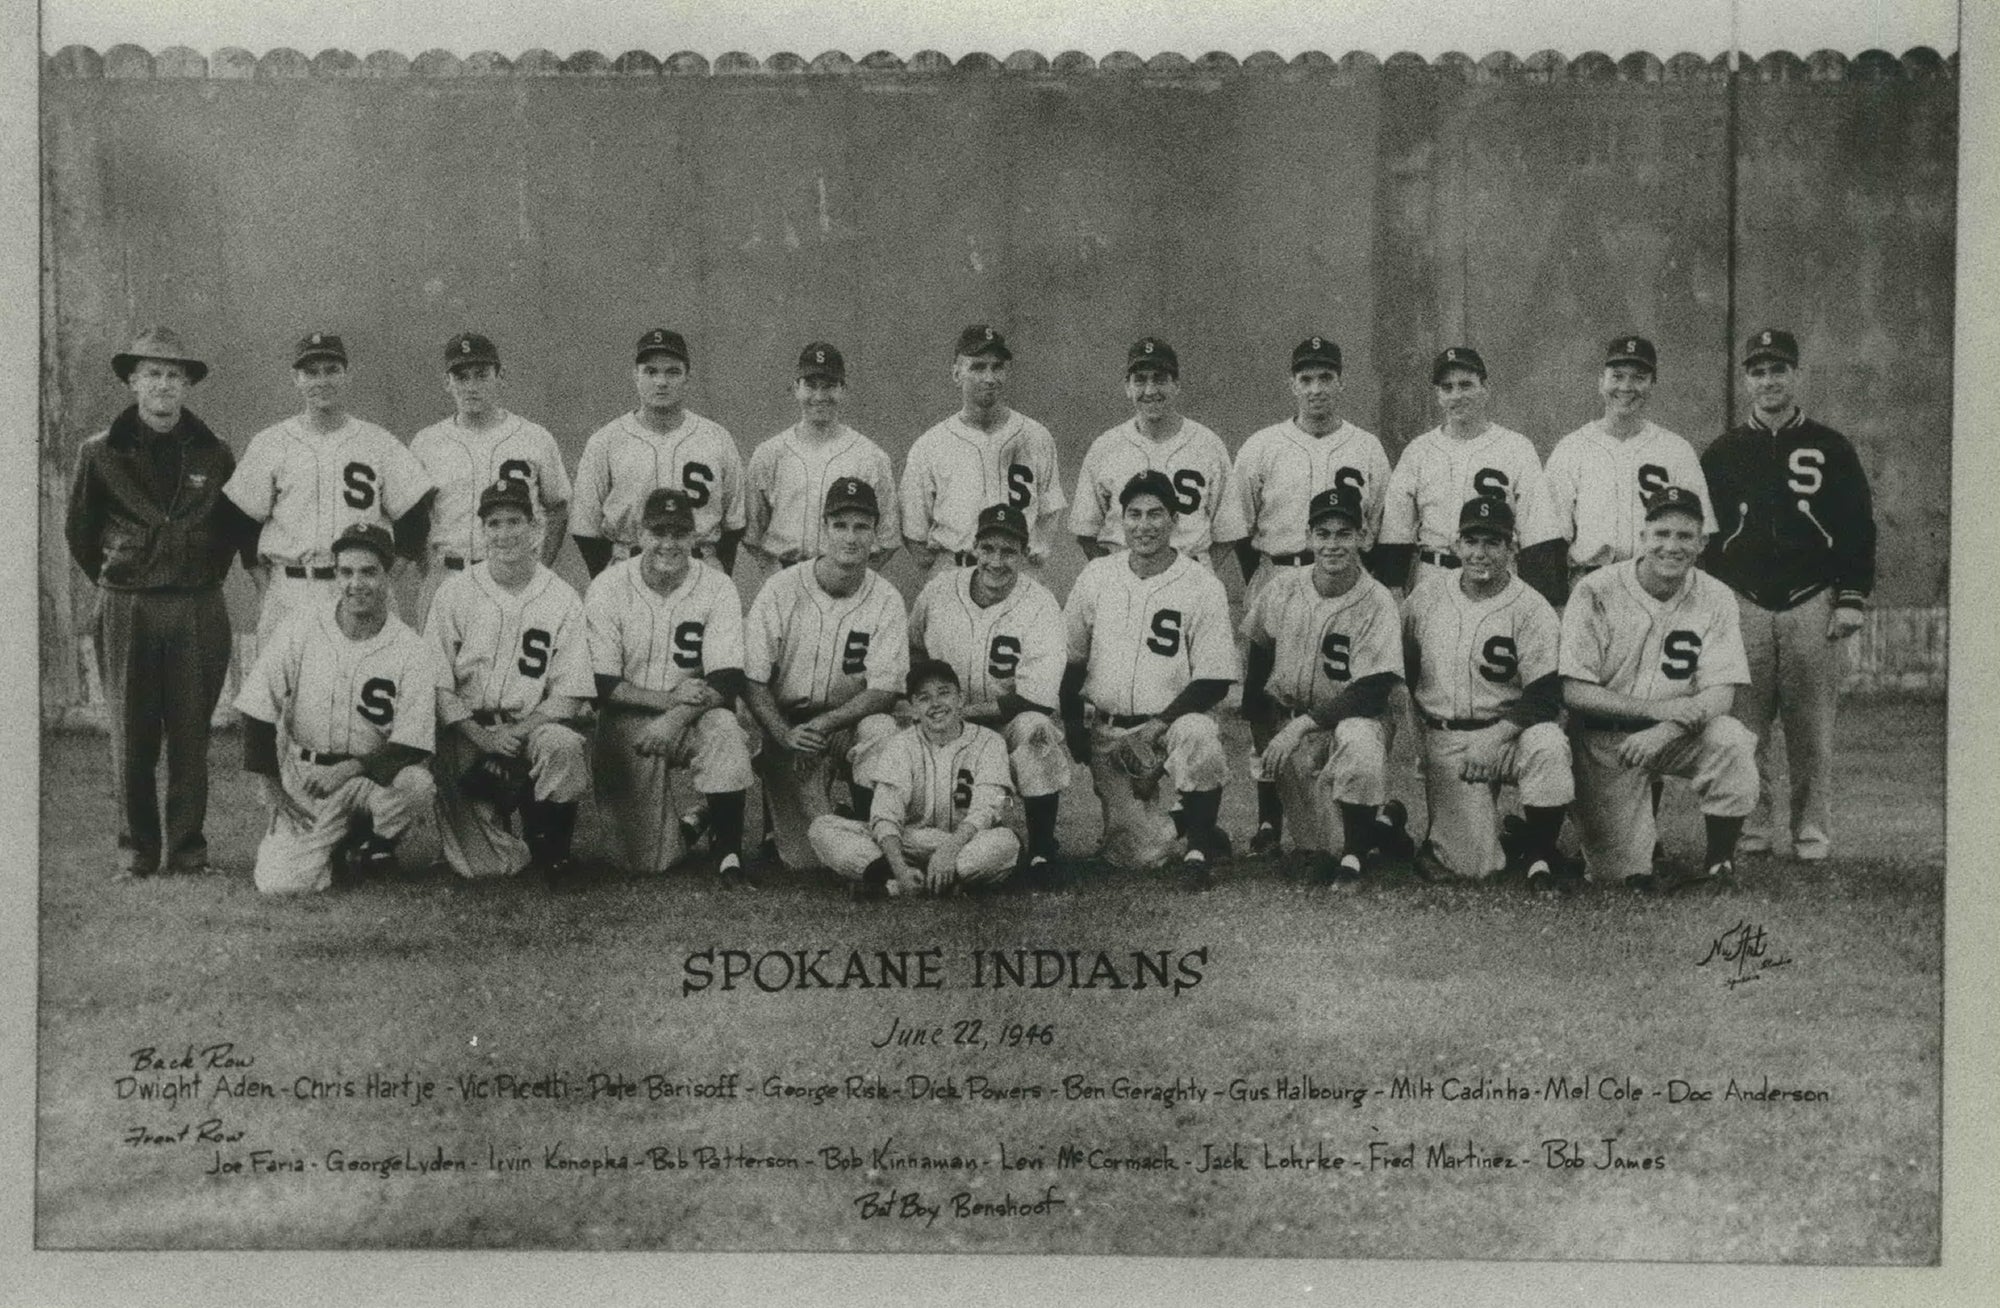 In 1946, unfathomable tragedy struck the Spokane Indians